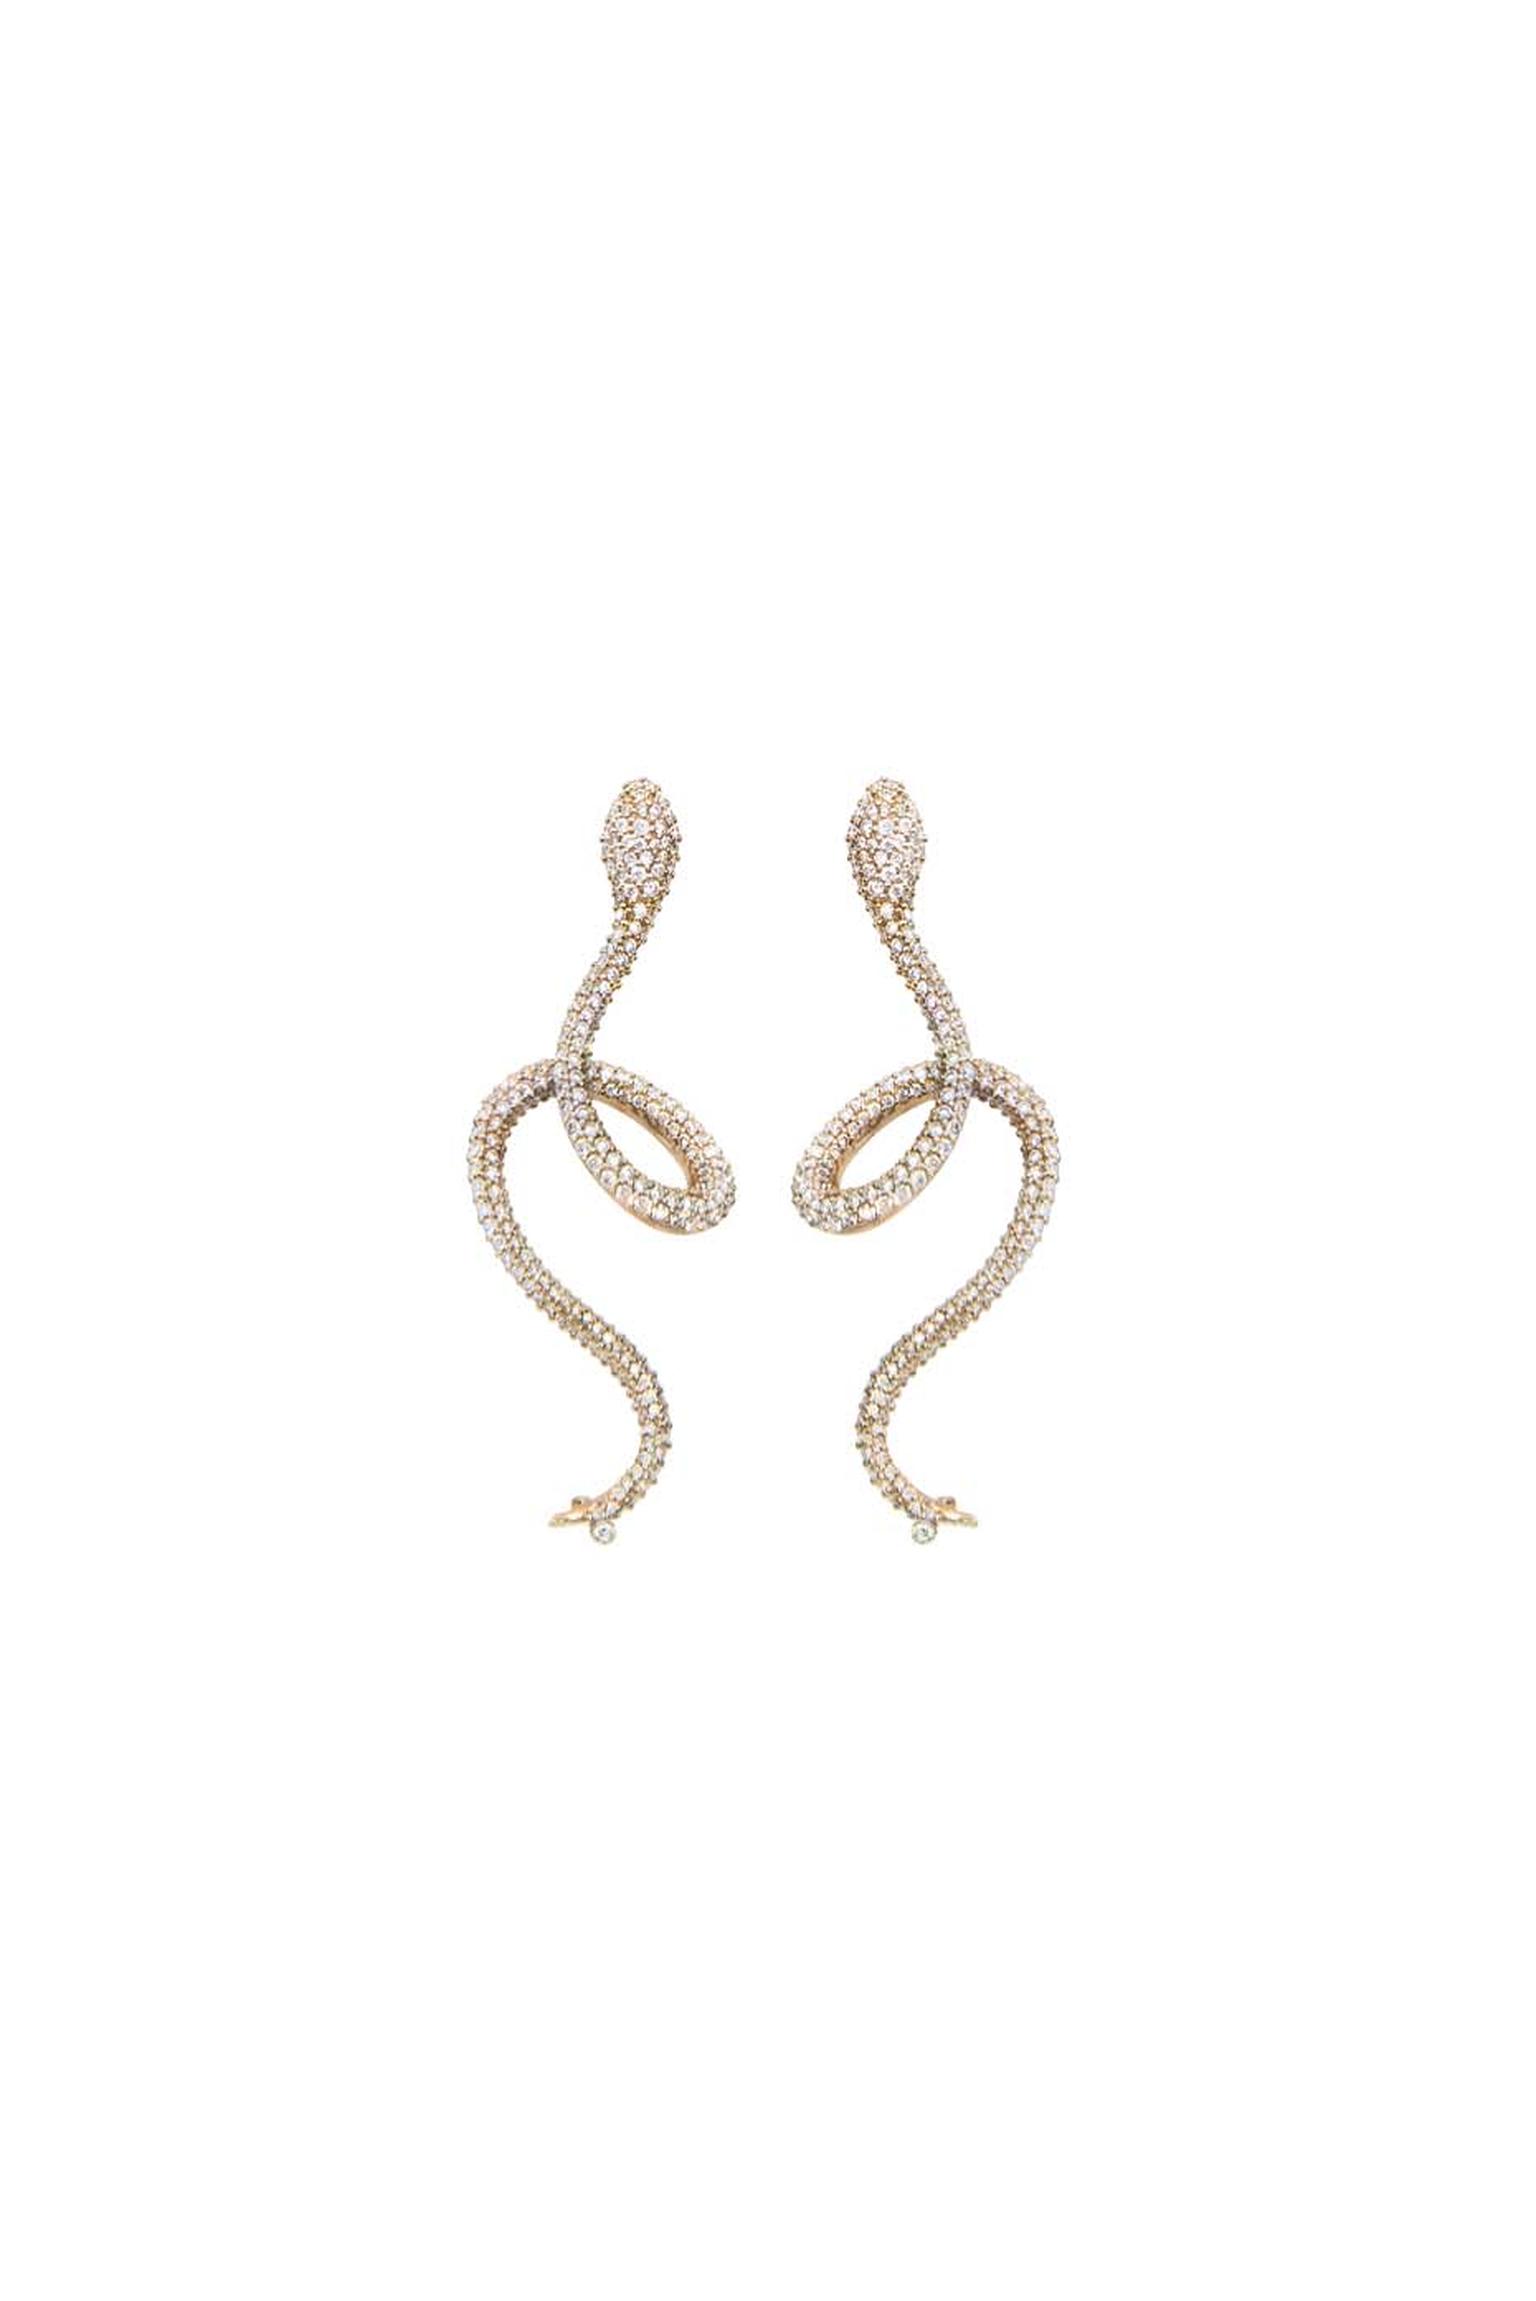 Ole Lynggaard snake earrings in 18ct yellow gold with diamonds.